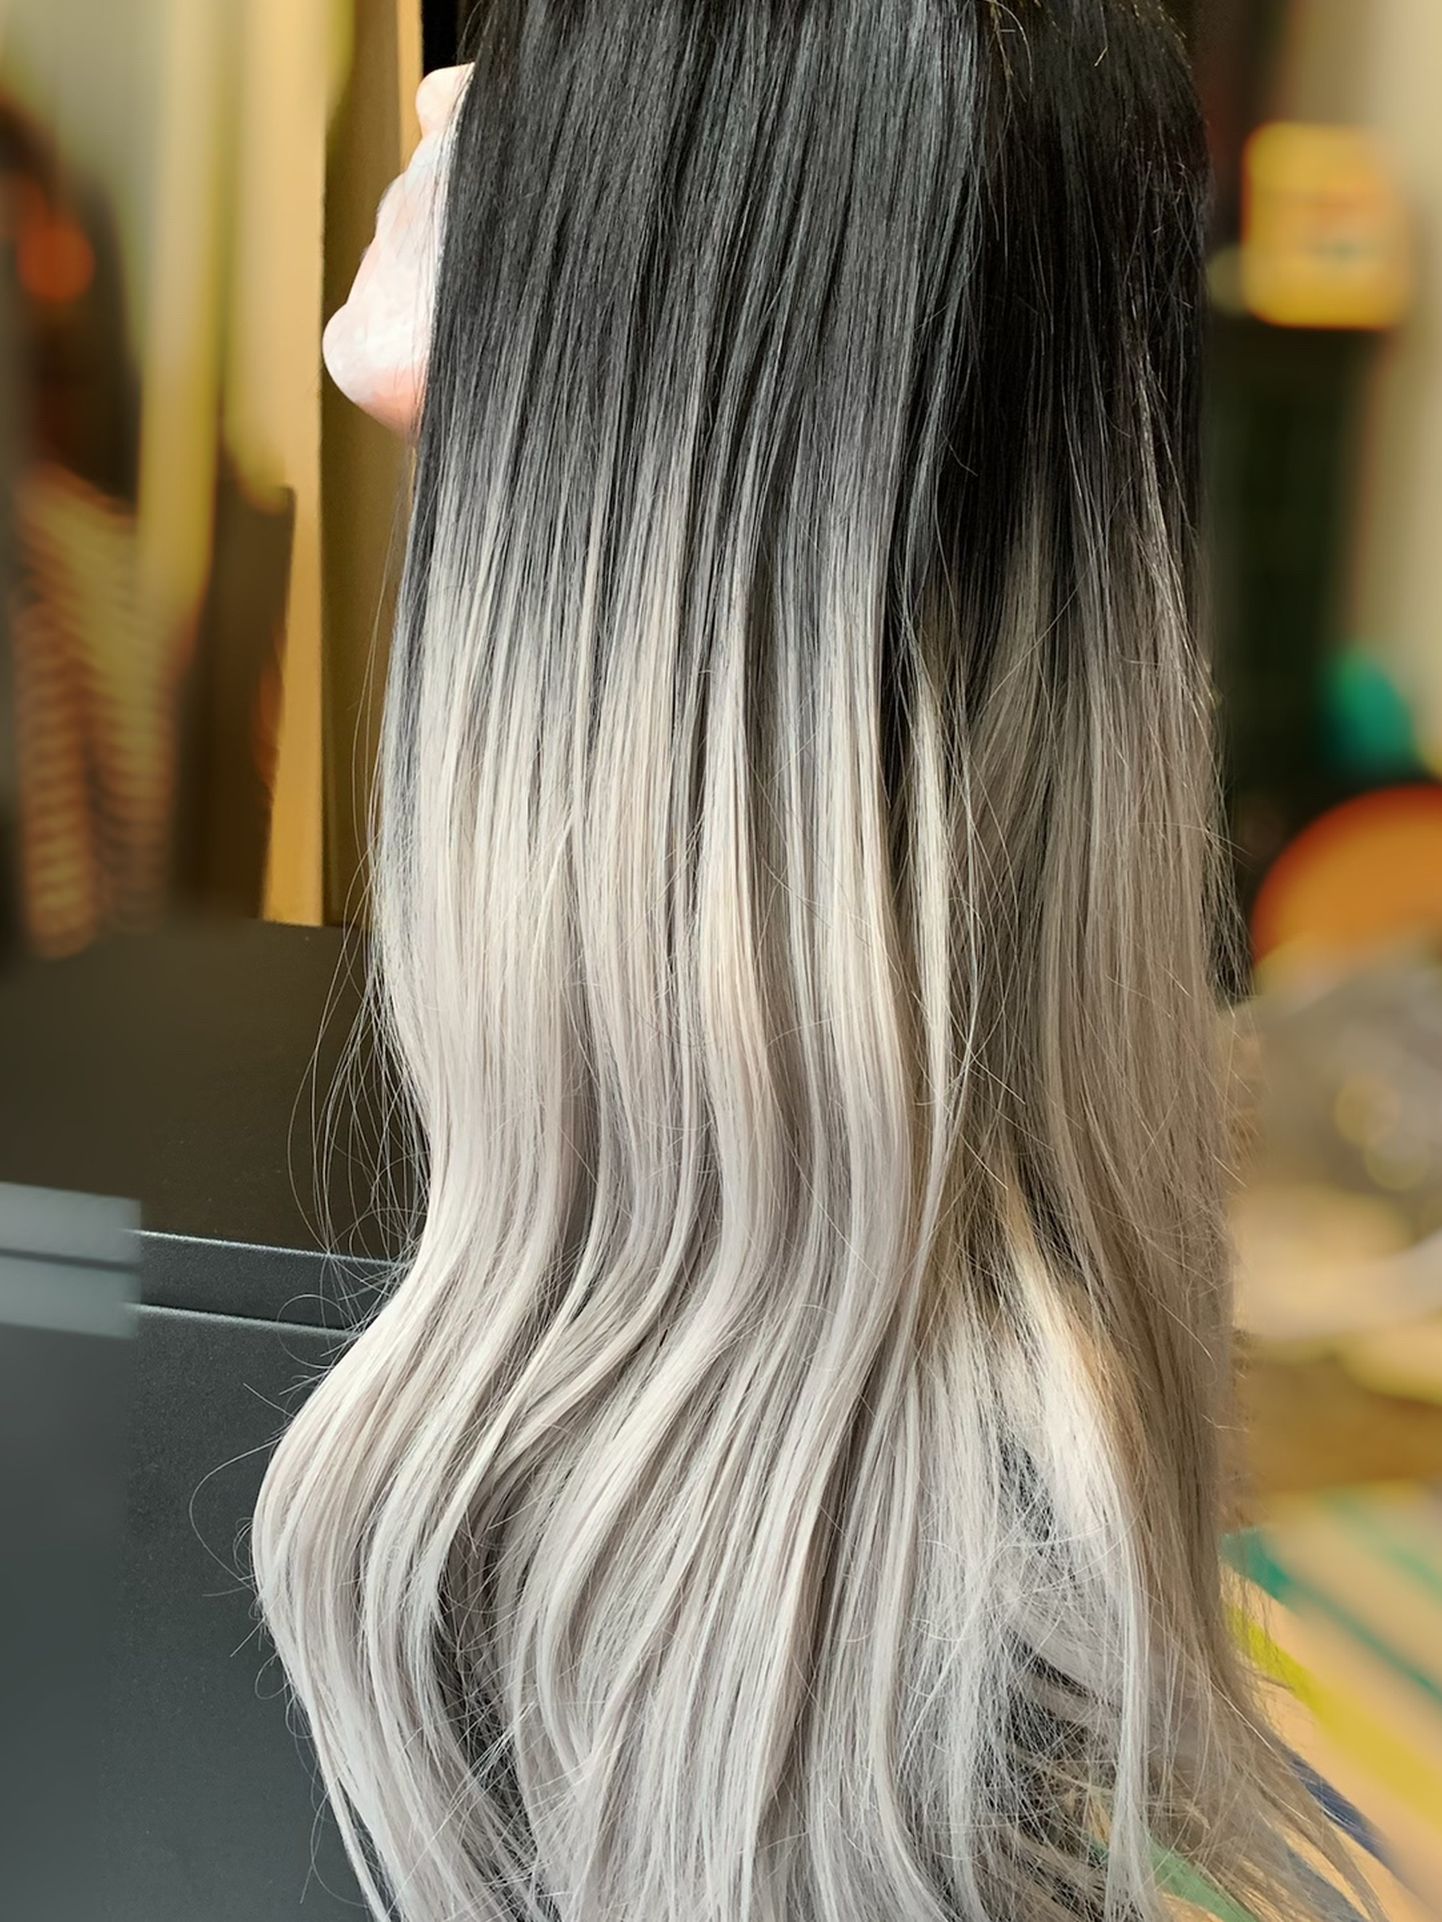 Lace front Wig Black To Gray Ombré Hair